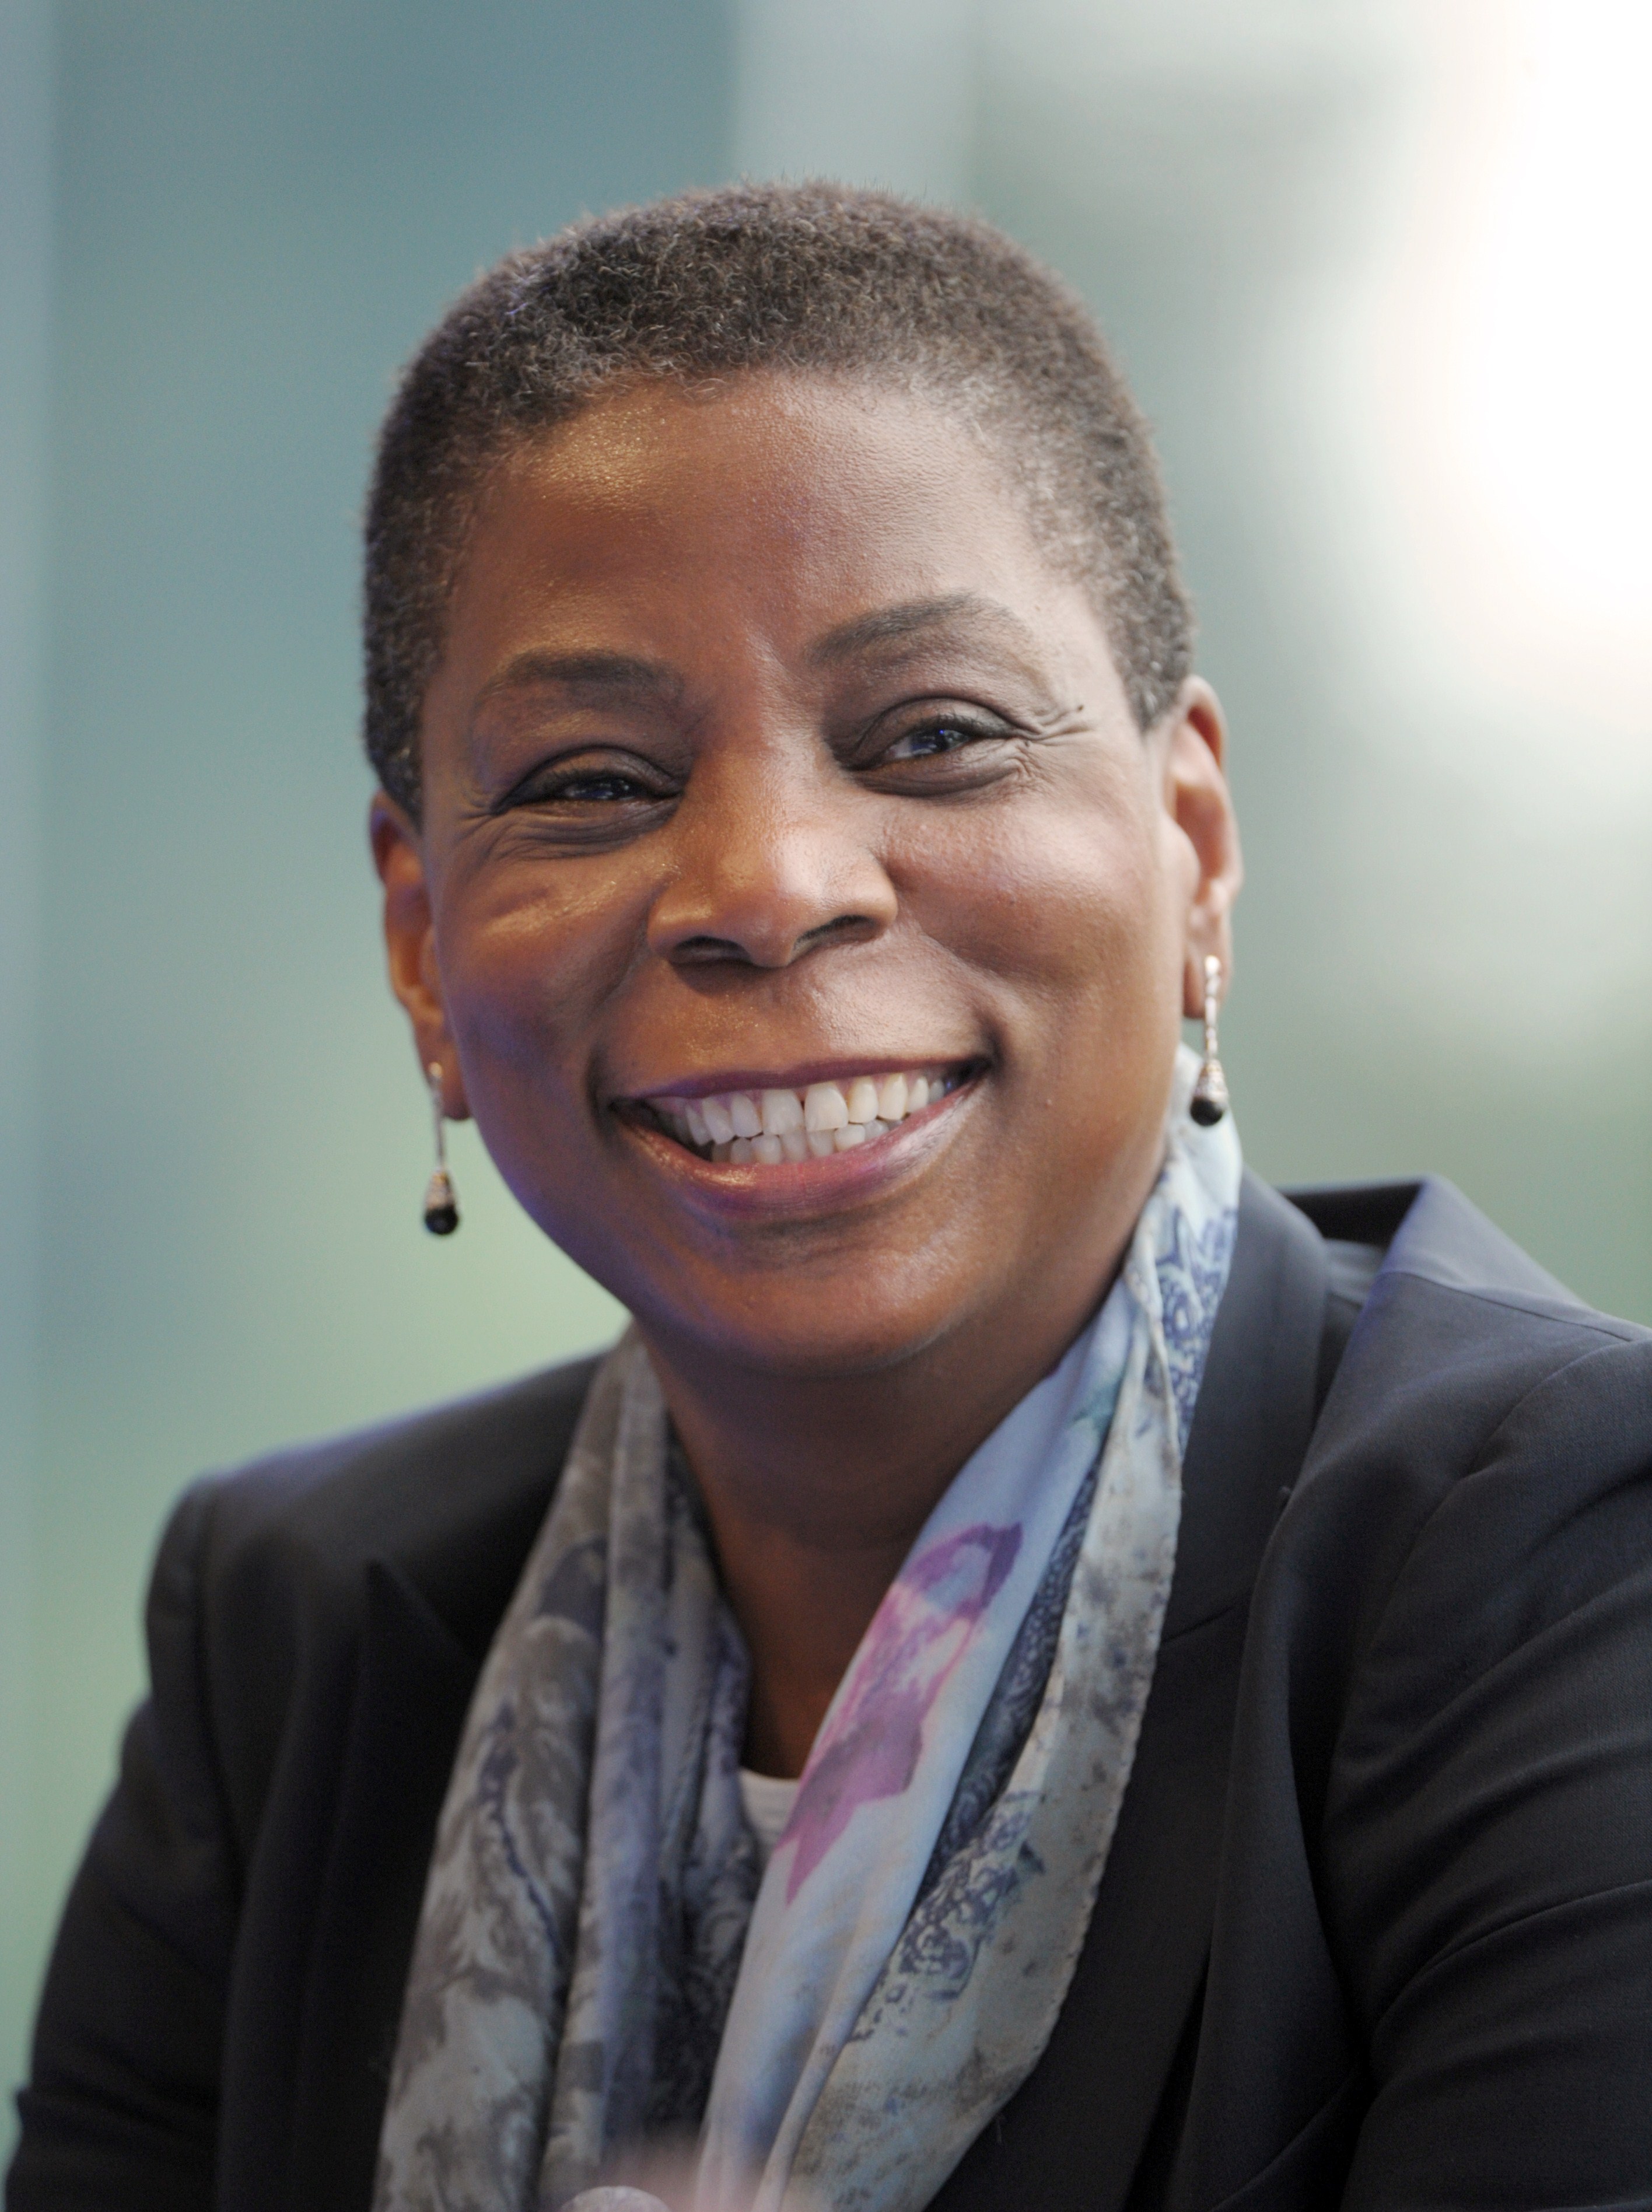 Xerox Corp CEO Ursula Burns at the French employers' association Medef summer conference in Jouy-en-Josas, France on Aug. 28, 2014.